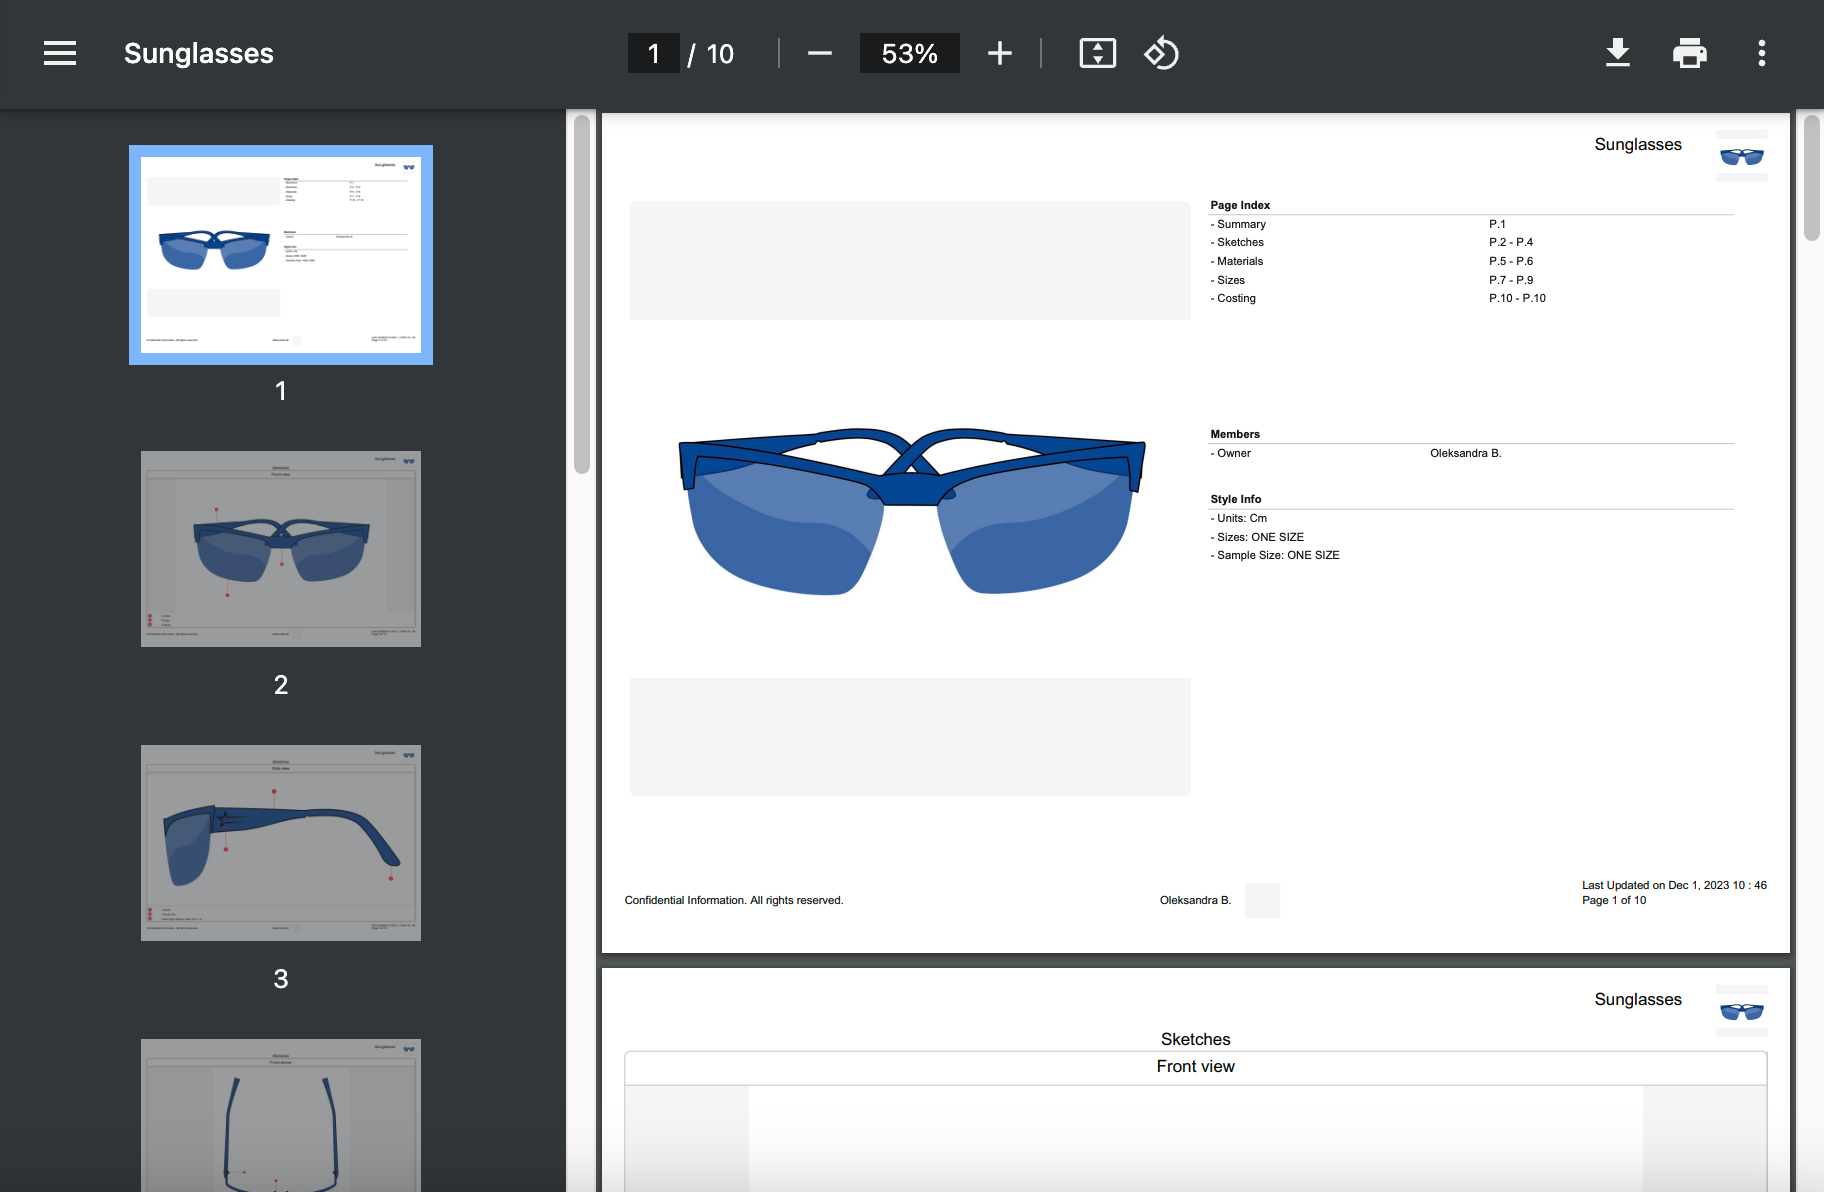 How to Create a Tech Pack for Eyewear